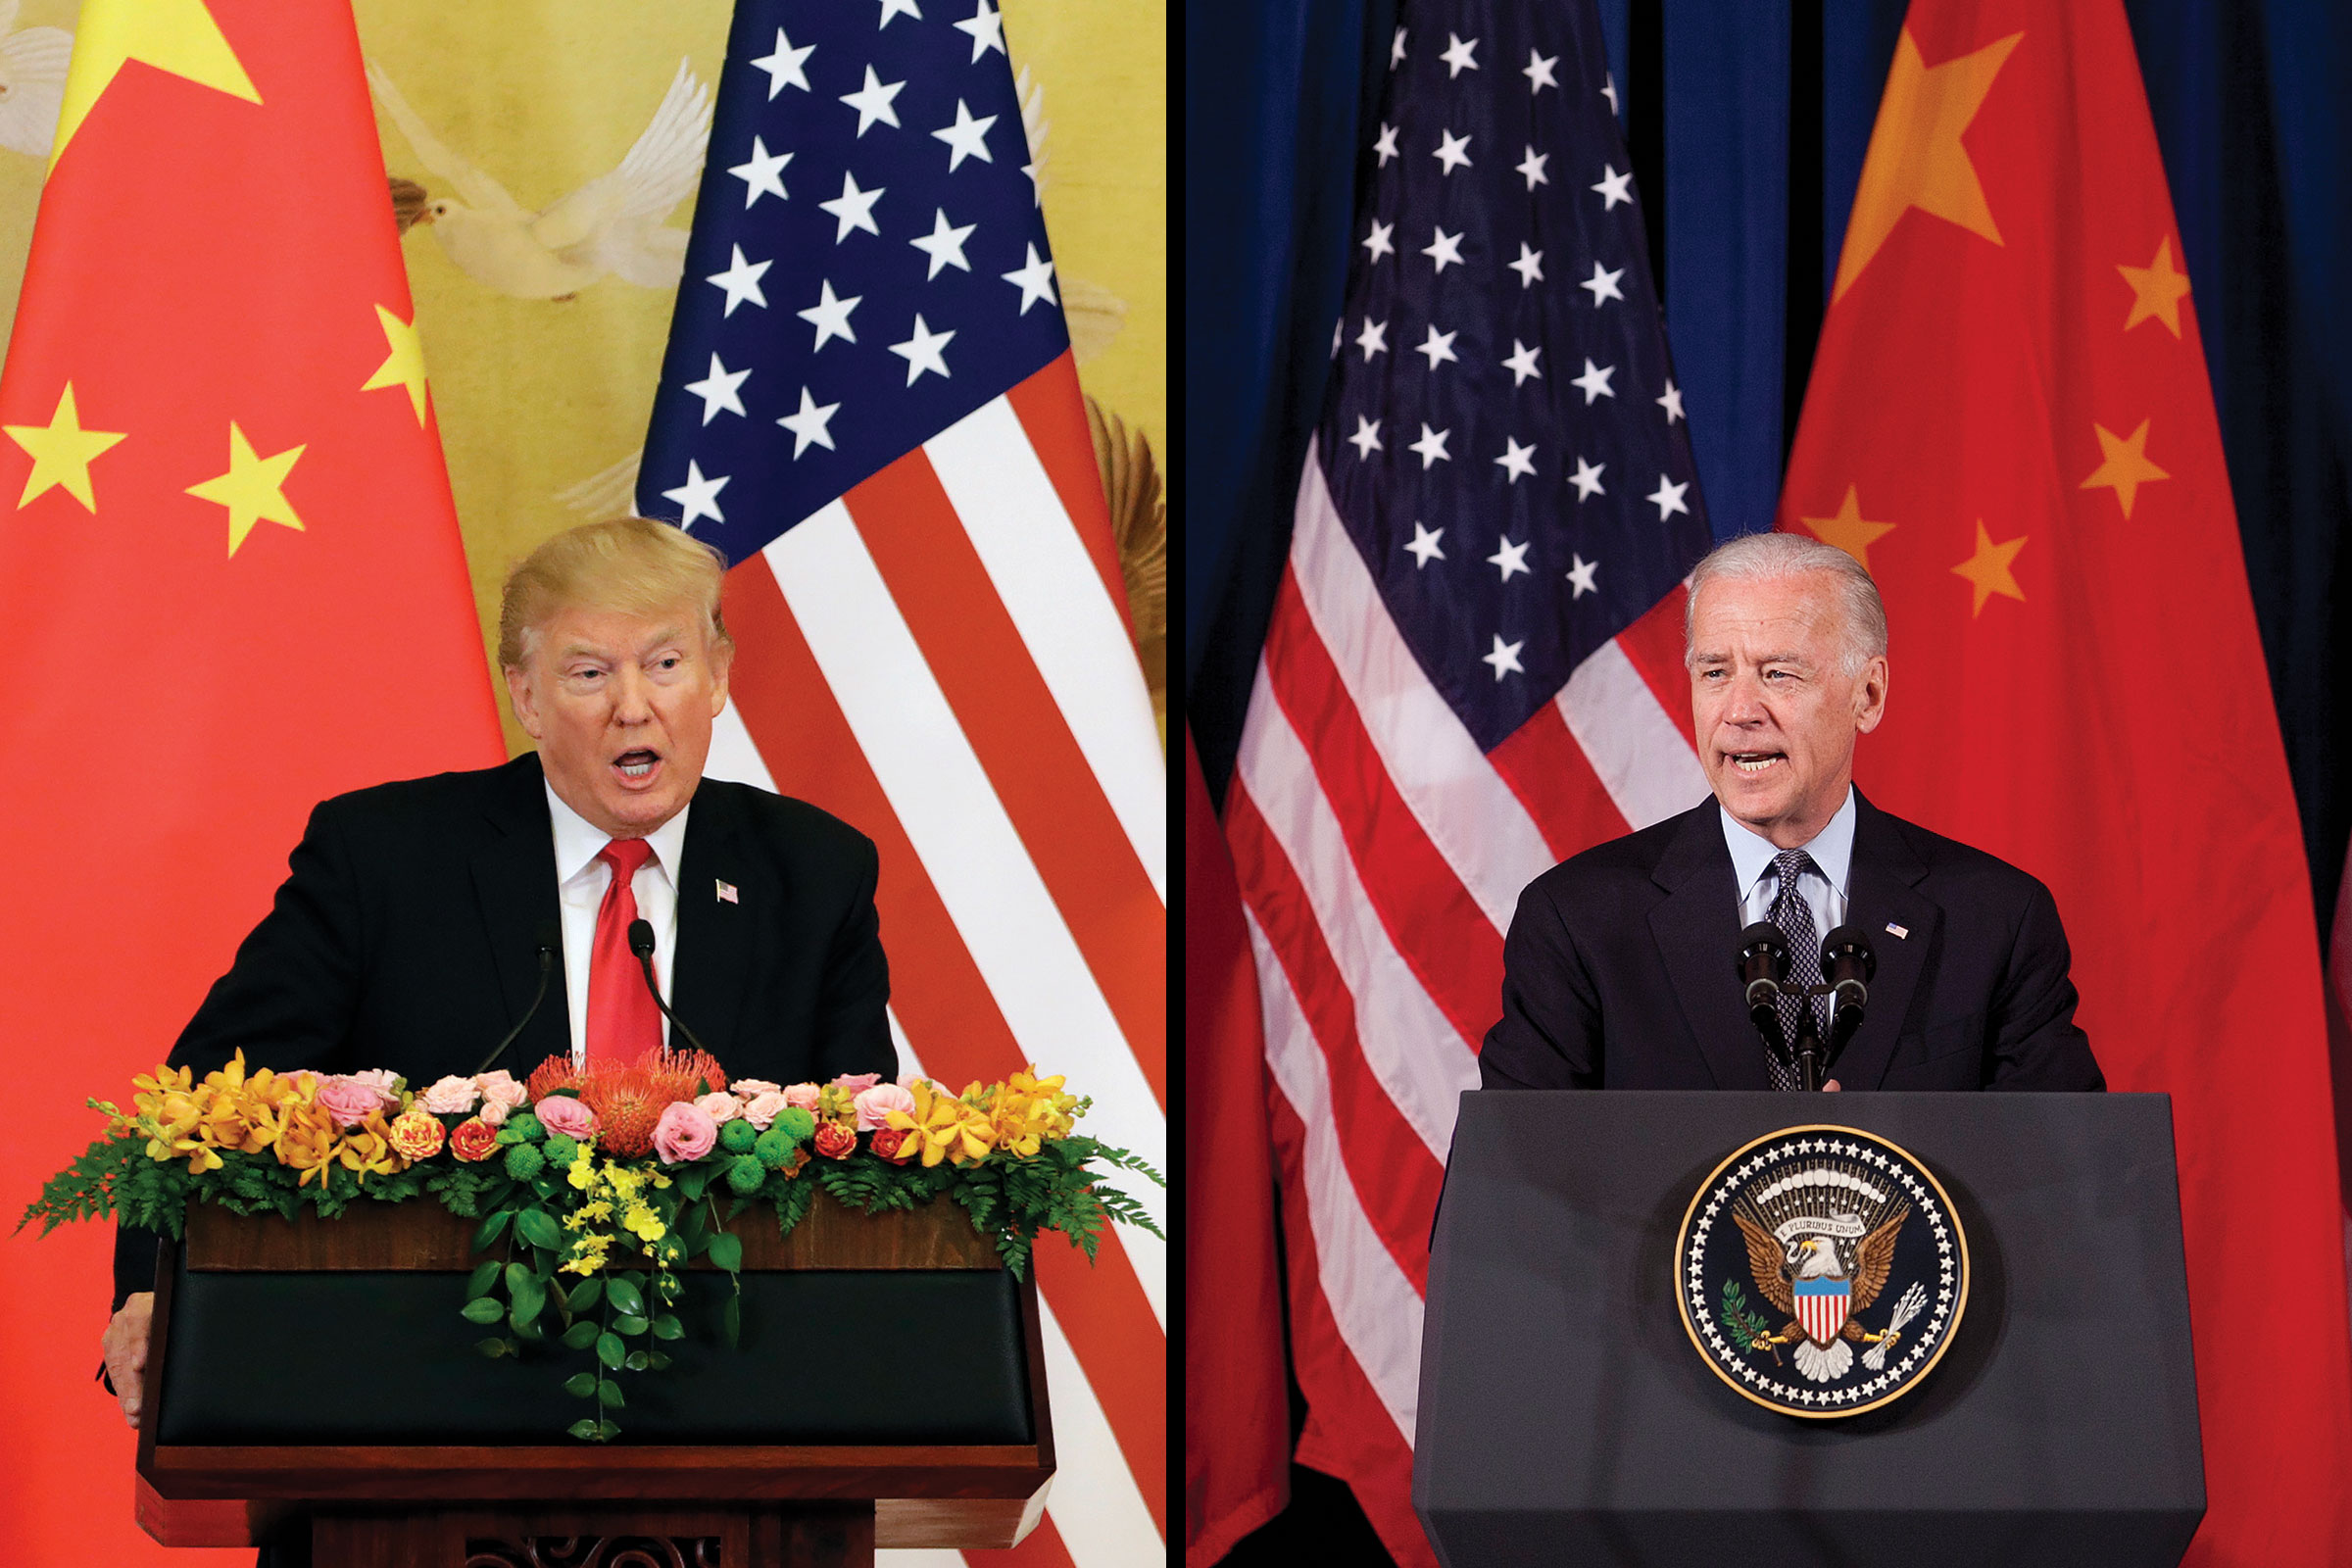 President Donald Trump during a news conference at the Great Hall of the People in Beijing, China, Nov. 9, 2017; Then Vice President Joe Biden during the opening ceremony of the U.S.-China Strategic &amp; Economic Dialogue in Washington, May 9, 2011 (Qilai Shen—Bloomberg/Getty Images; Andrew Harrer—Bloomberg/Getty Images)